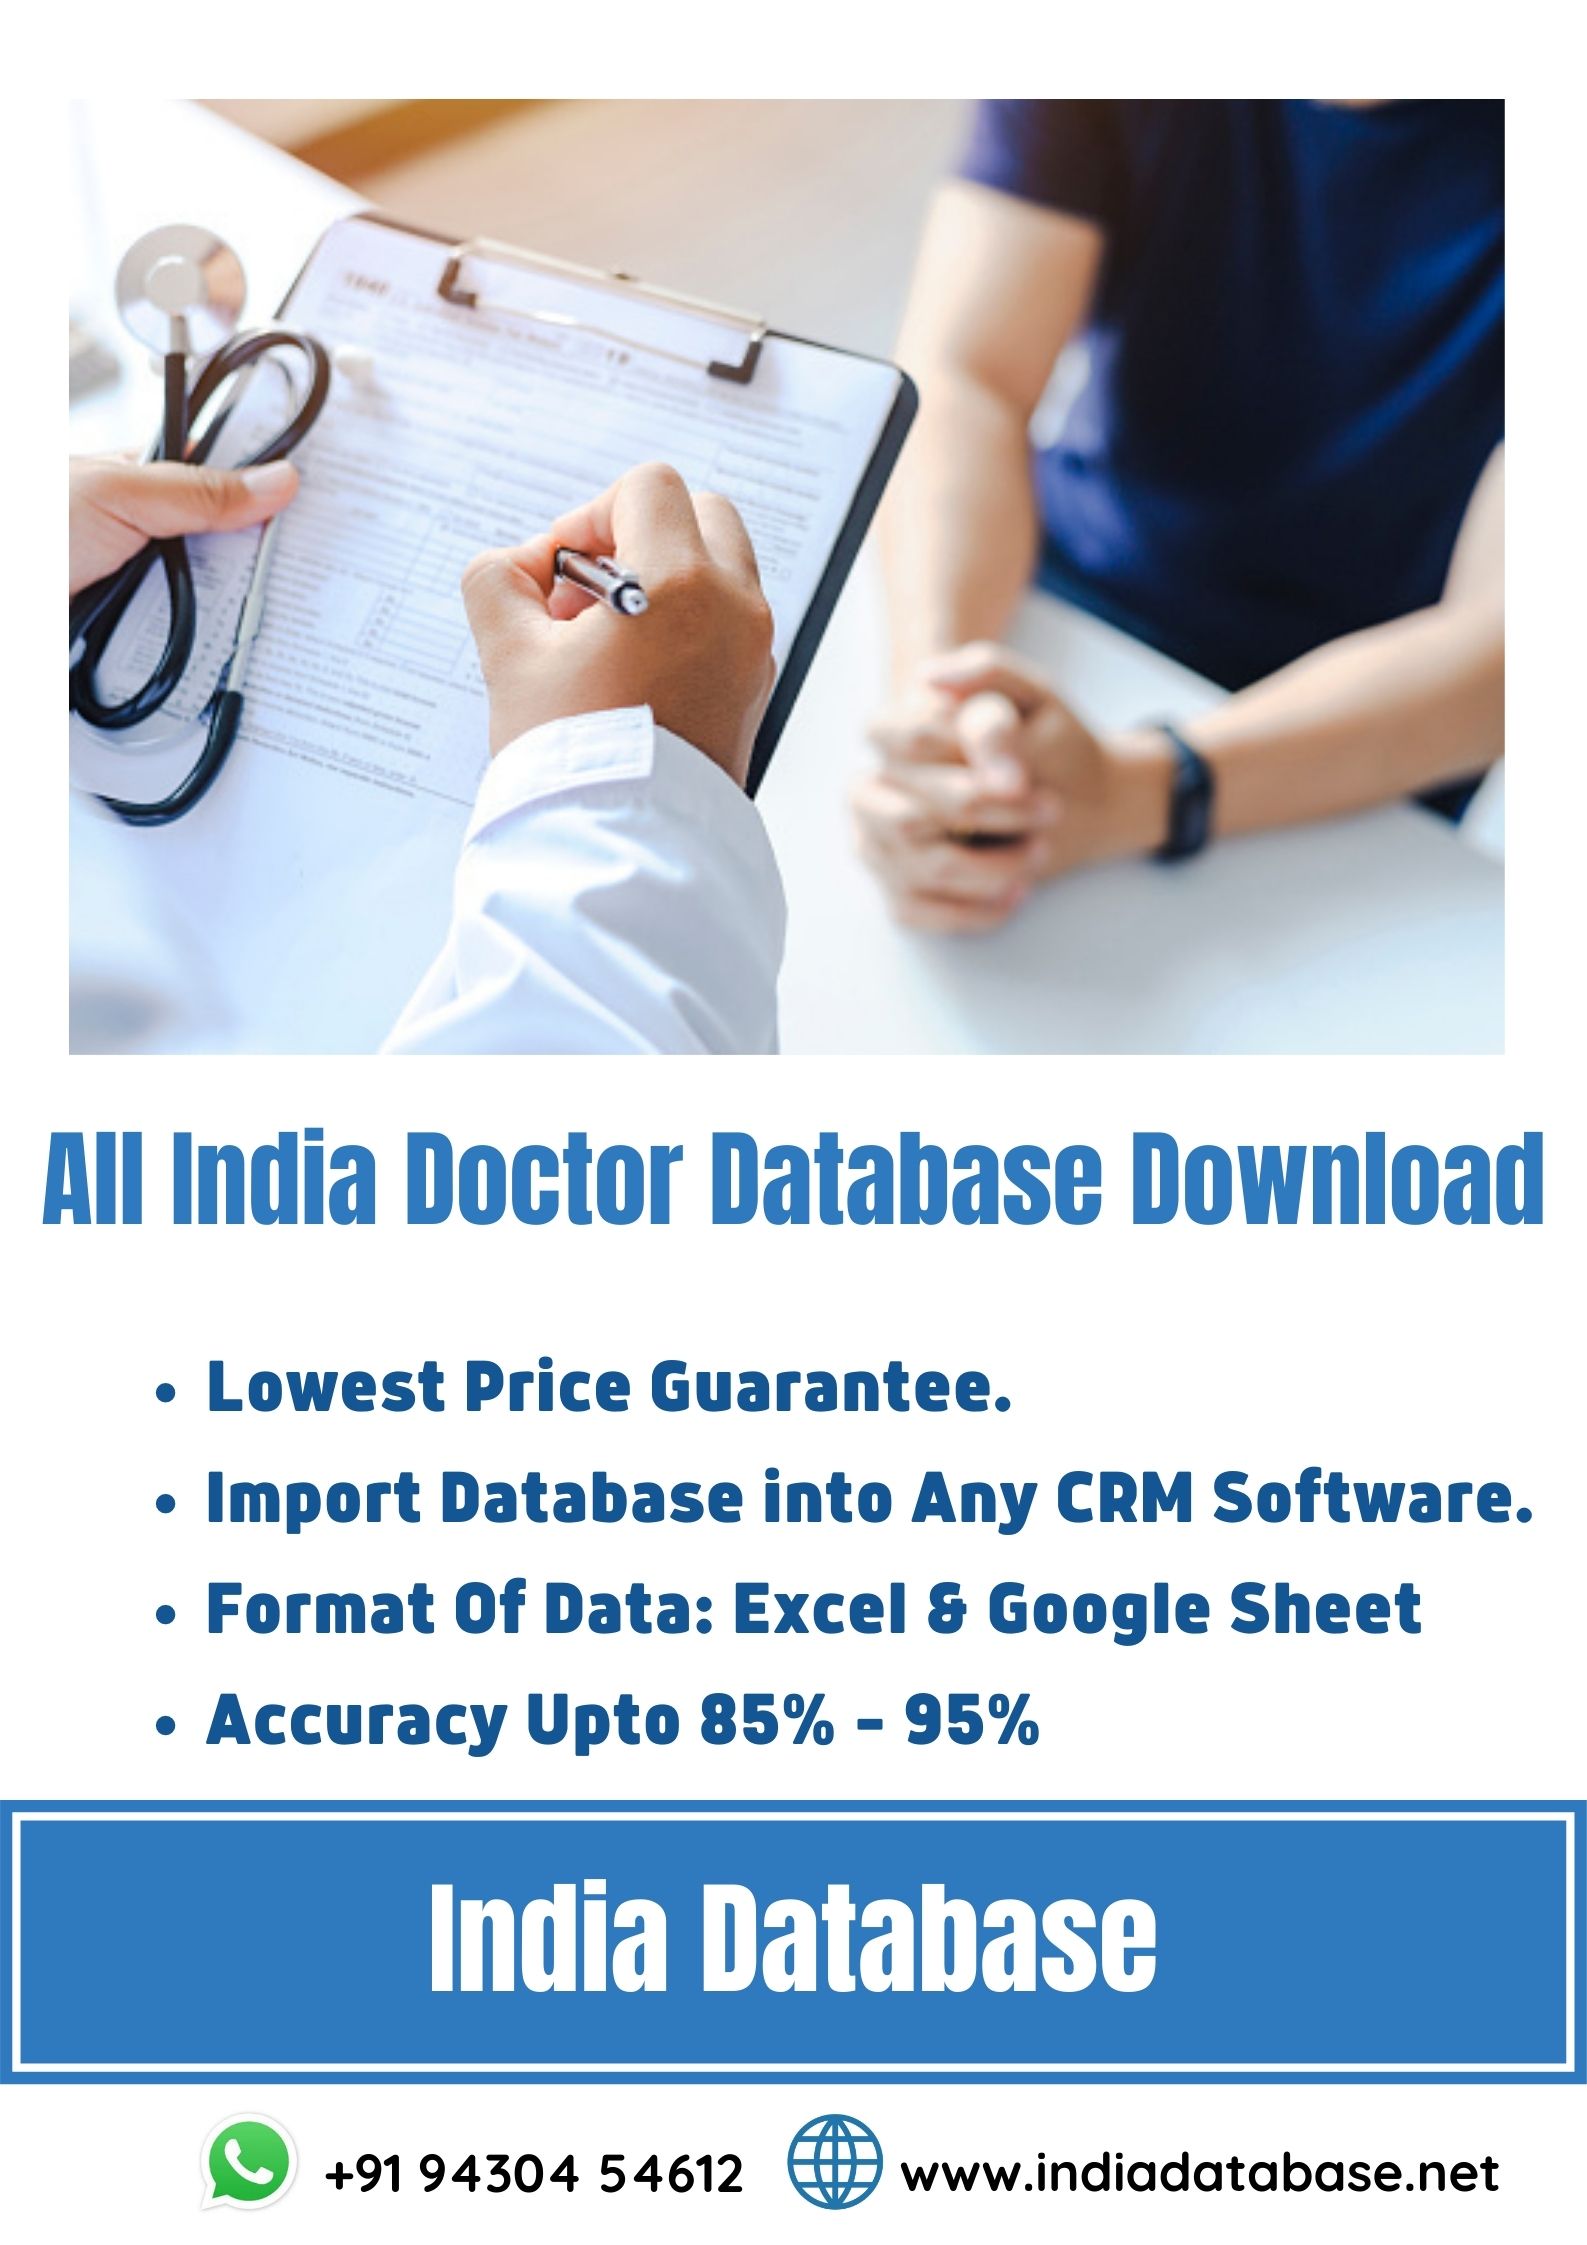 All India Doctor Database